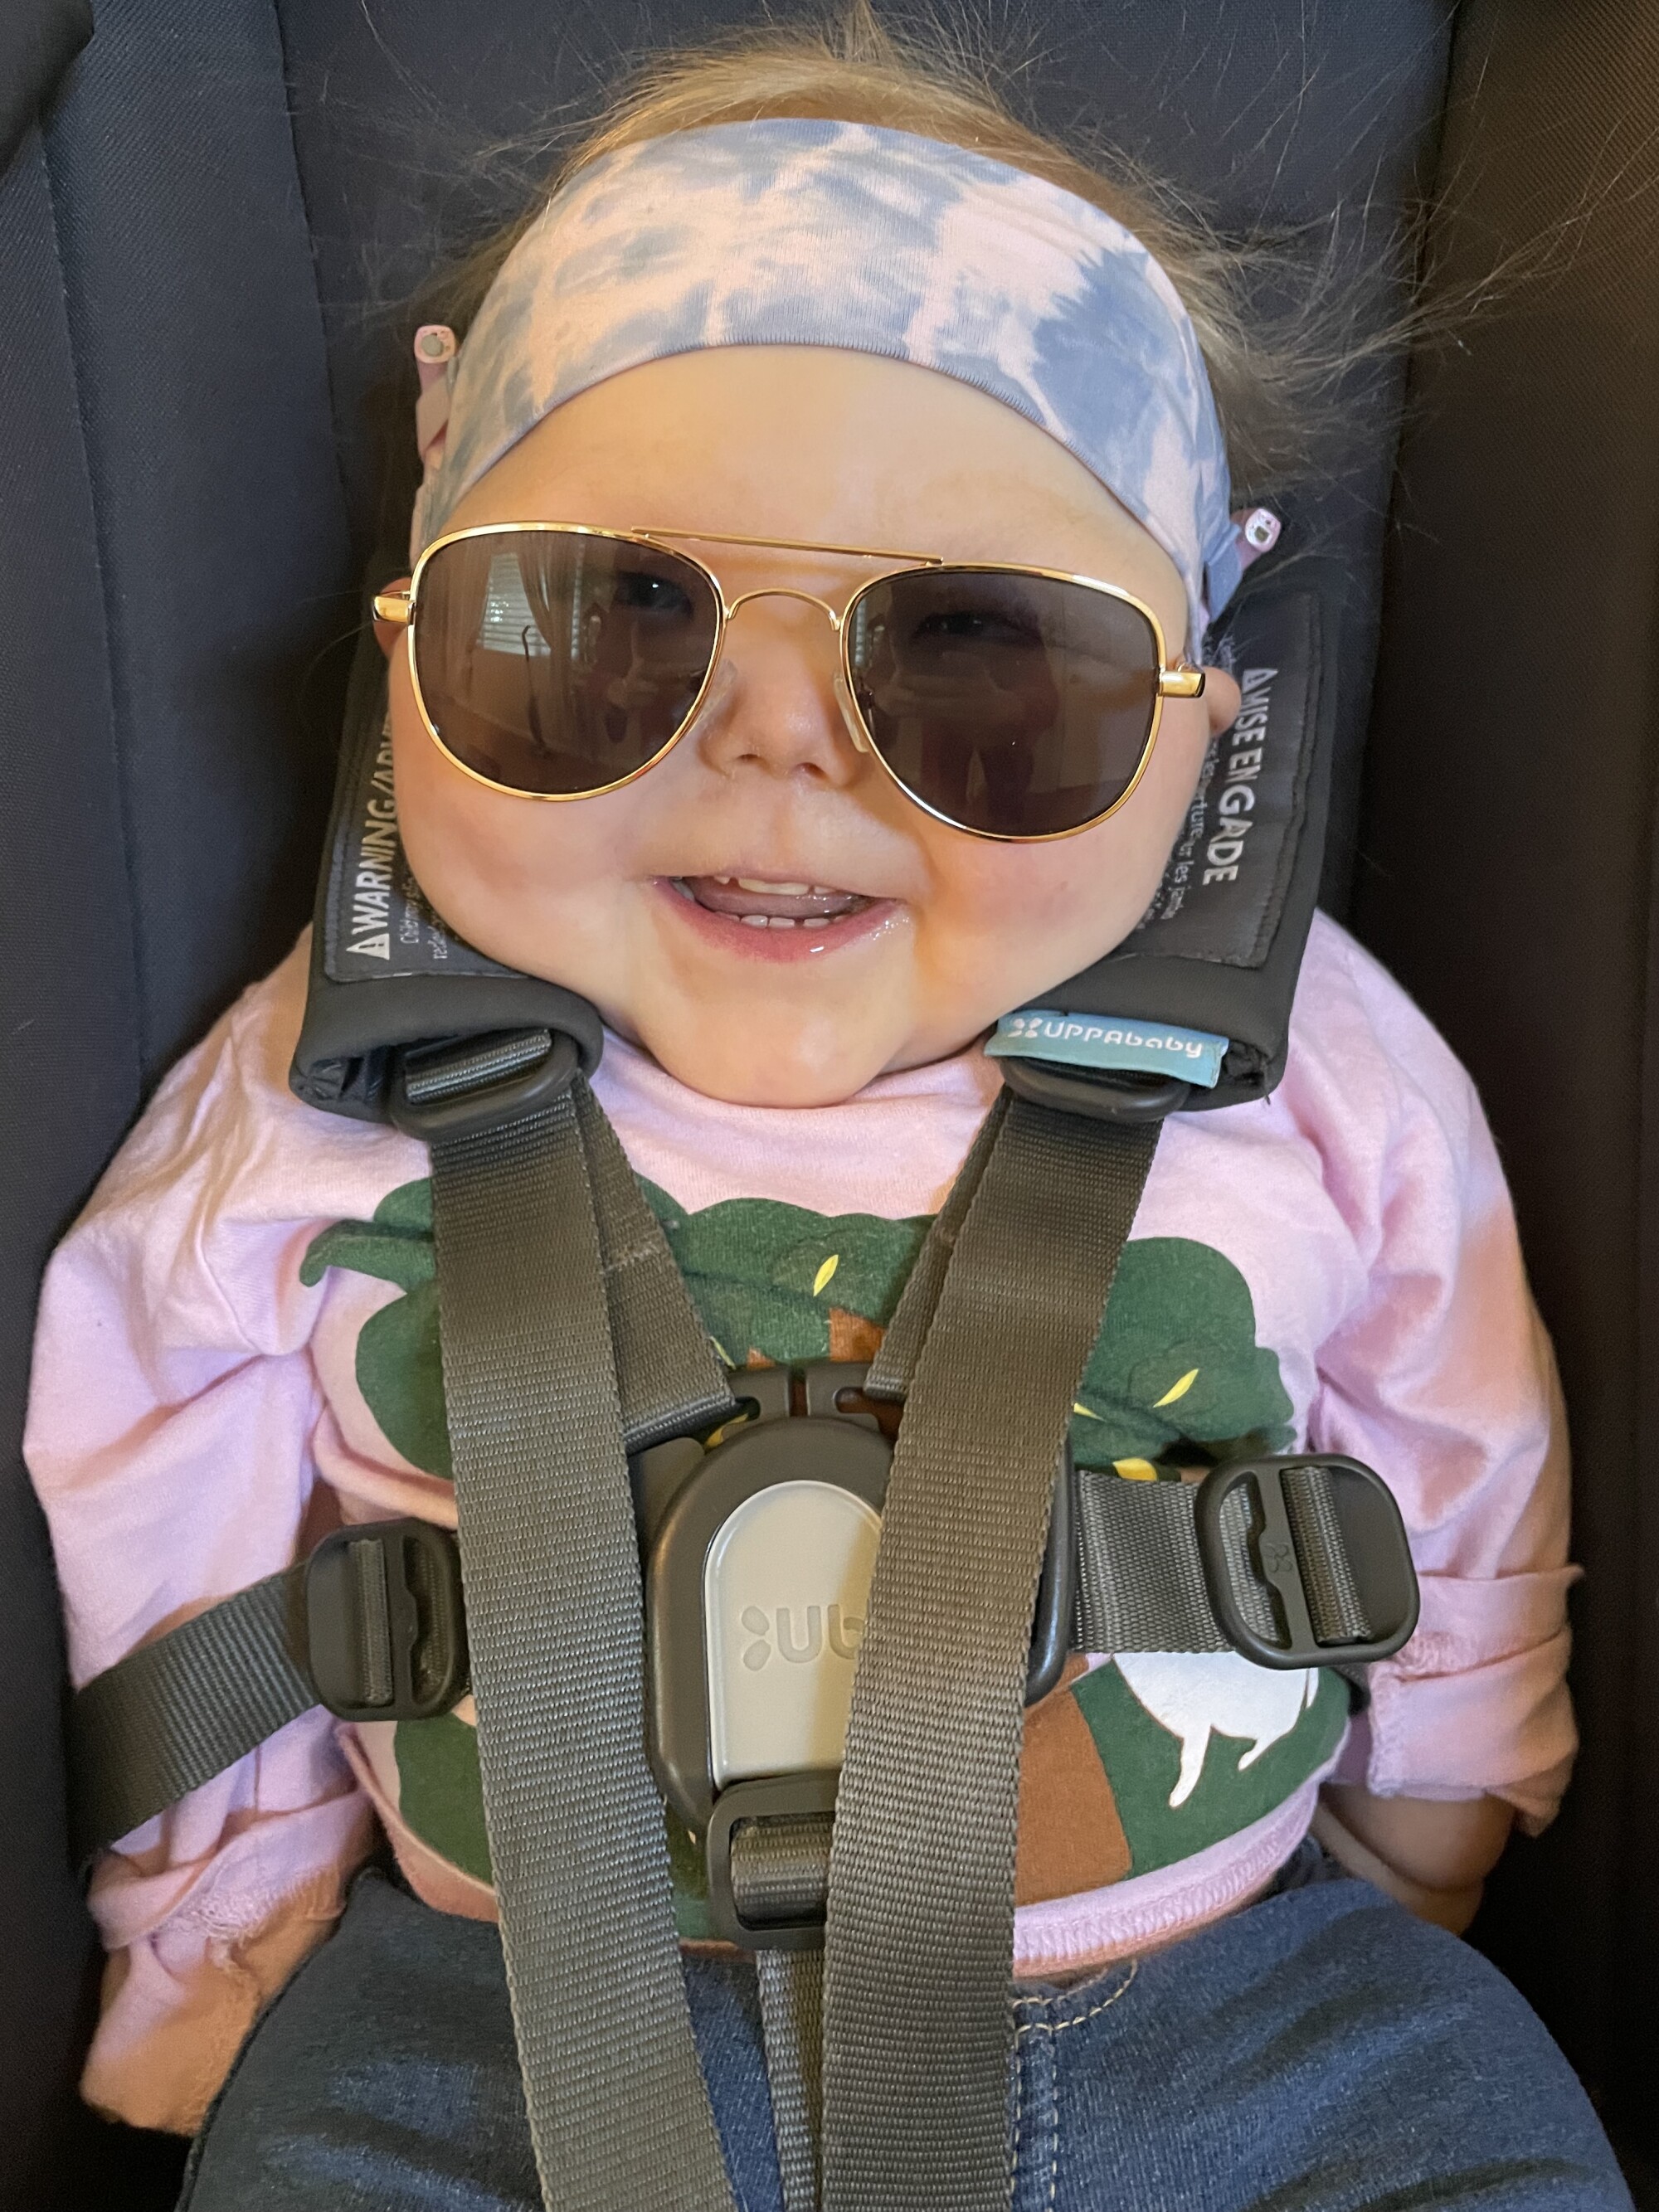 A smiling baby, wearing sunglasses and a headband, strapped into a car seat.